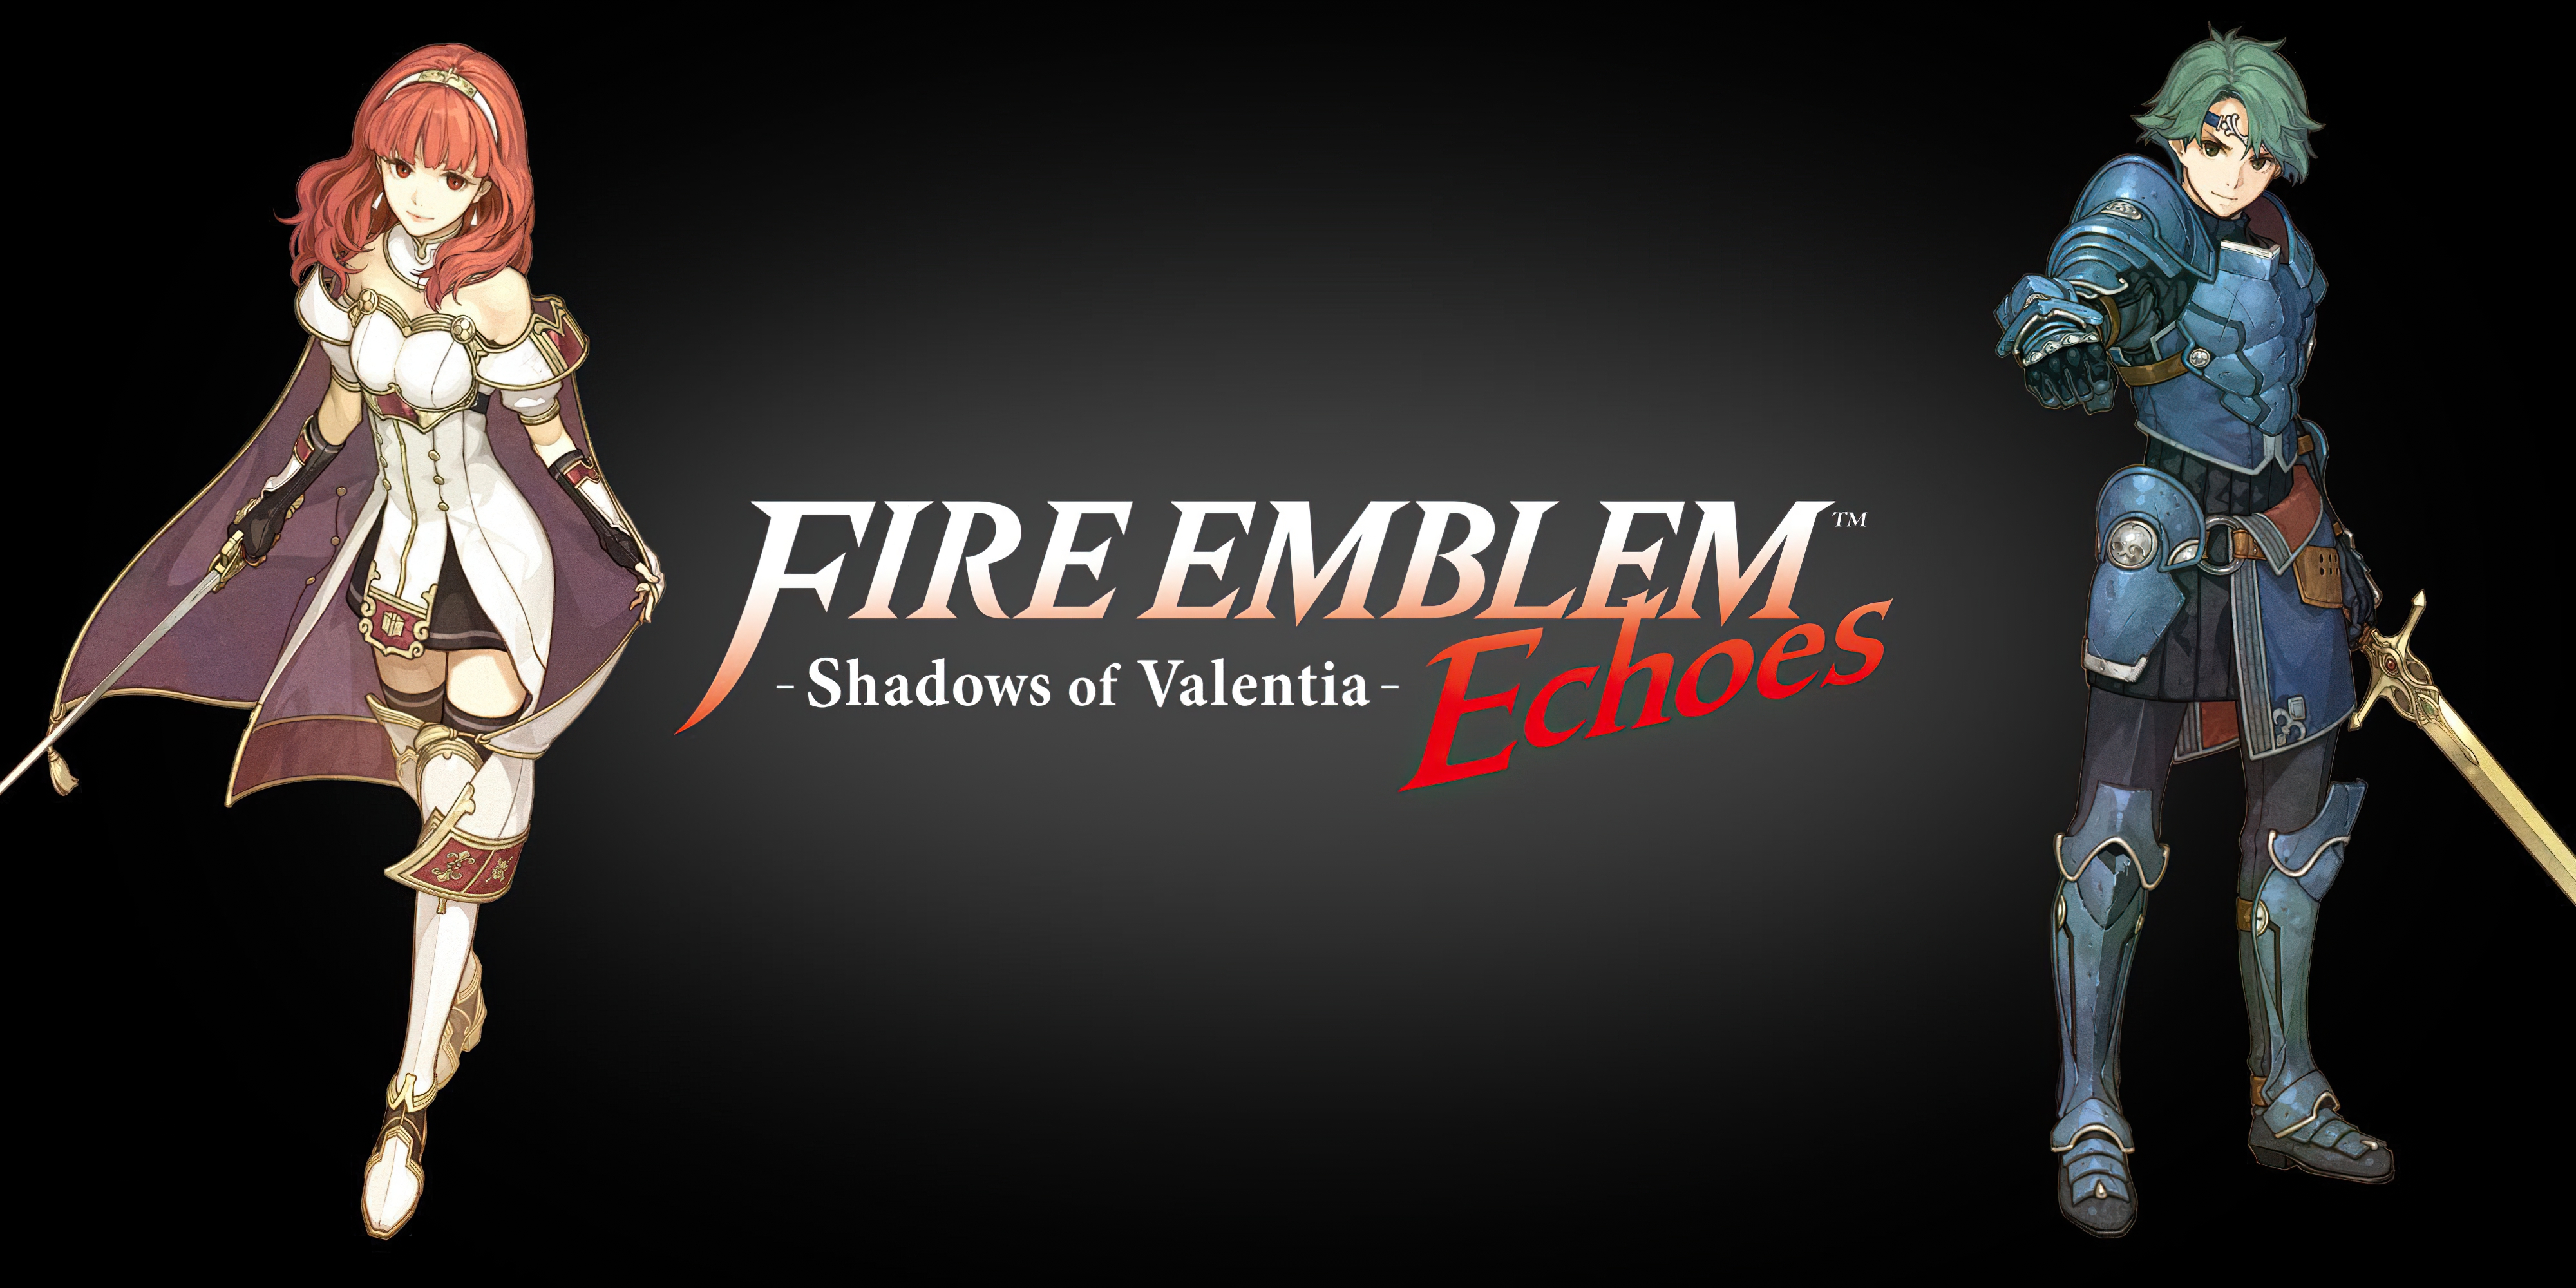 Video Game Fire Emblem Echoes: Shadows of Valentia HD Wallpaper | Background Image